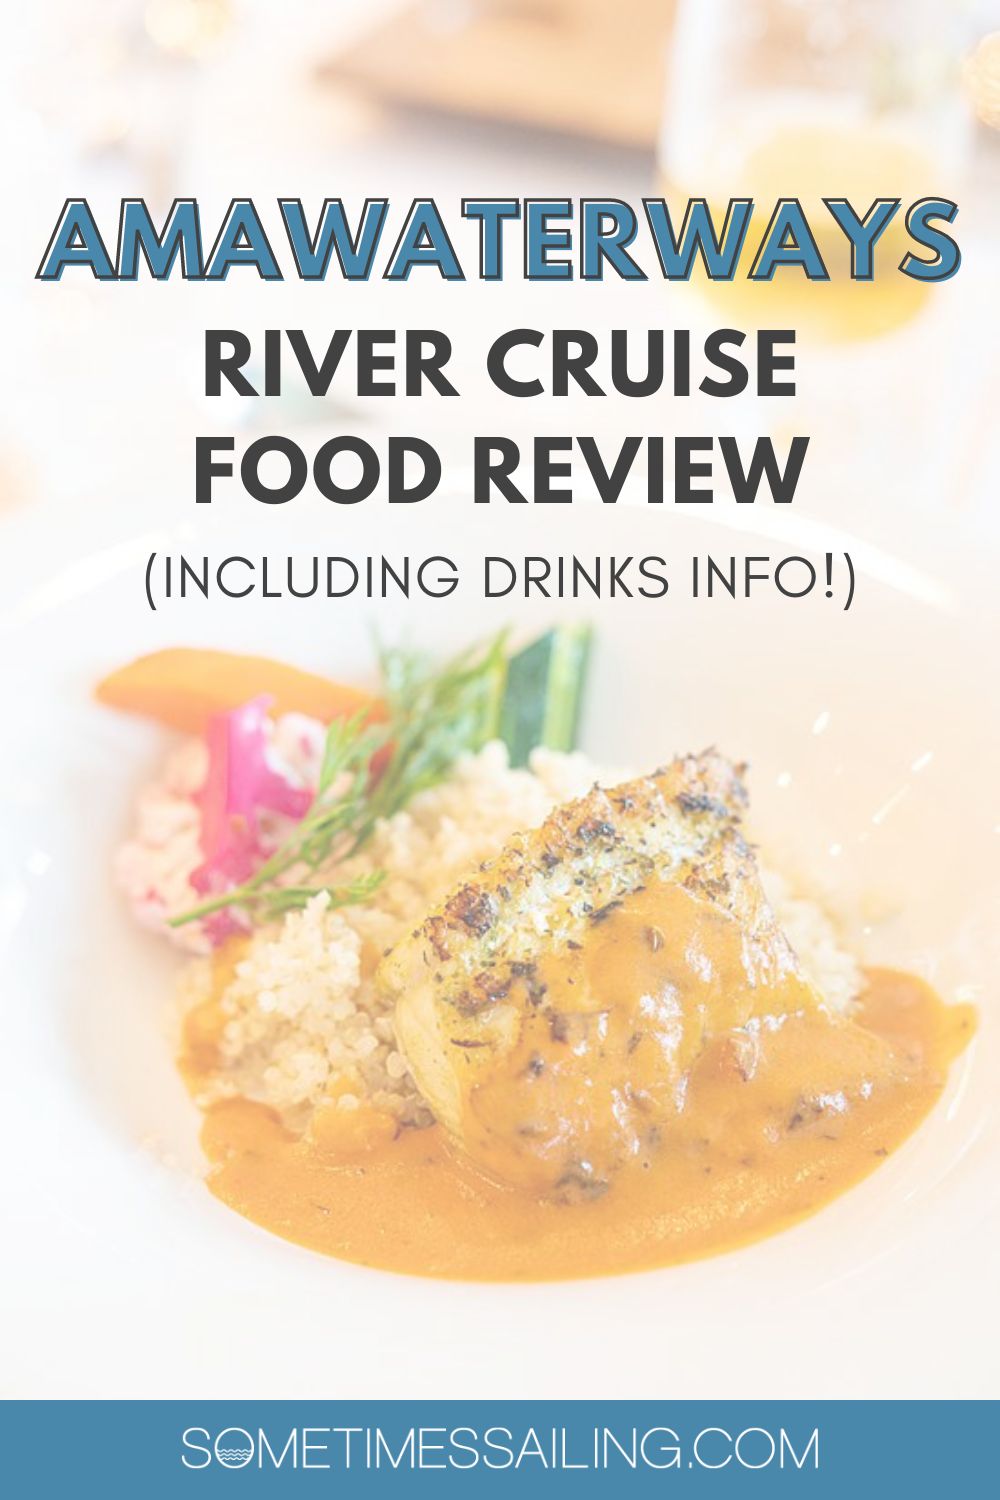 AmaWaterways River Cruise Food Review (including dining info) with a picture of an entree with fish, couscous with a sauce.